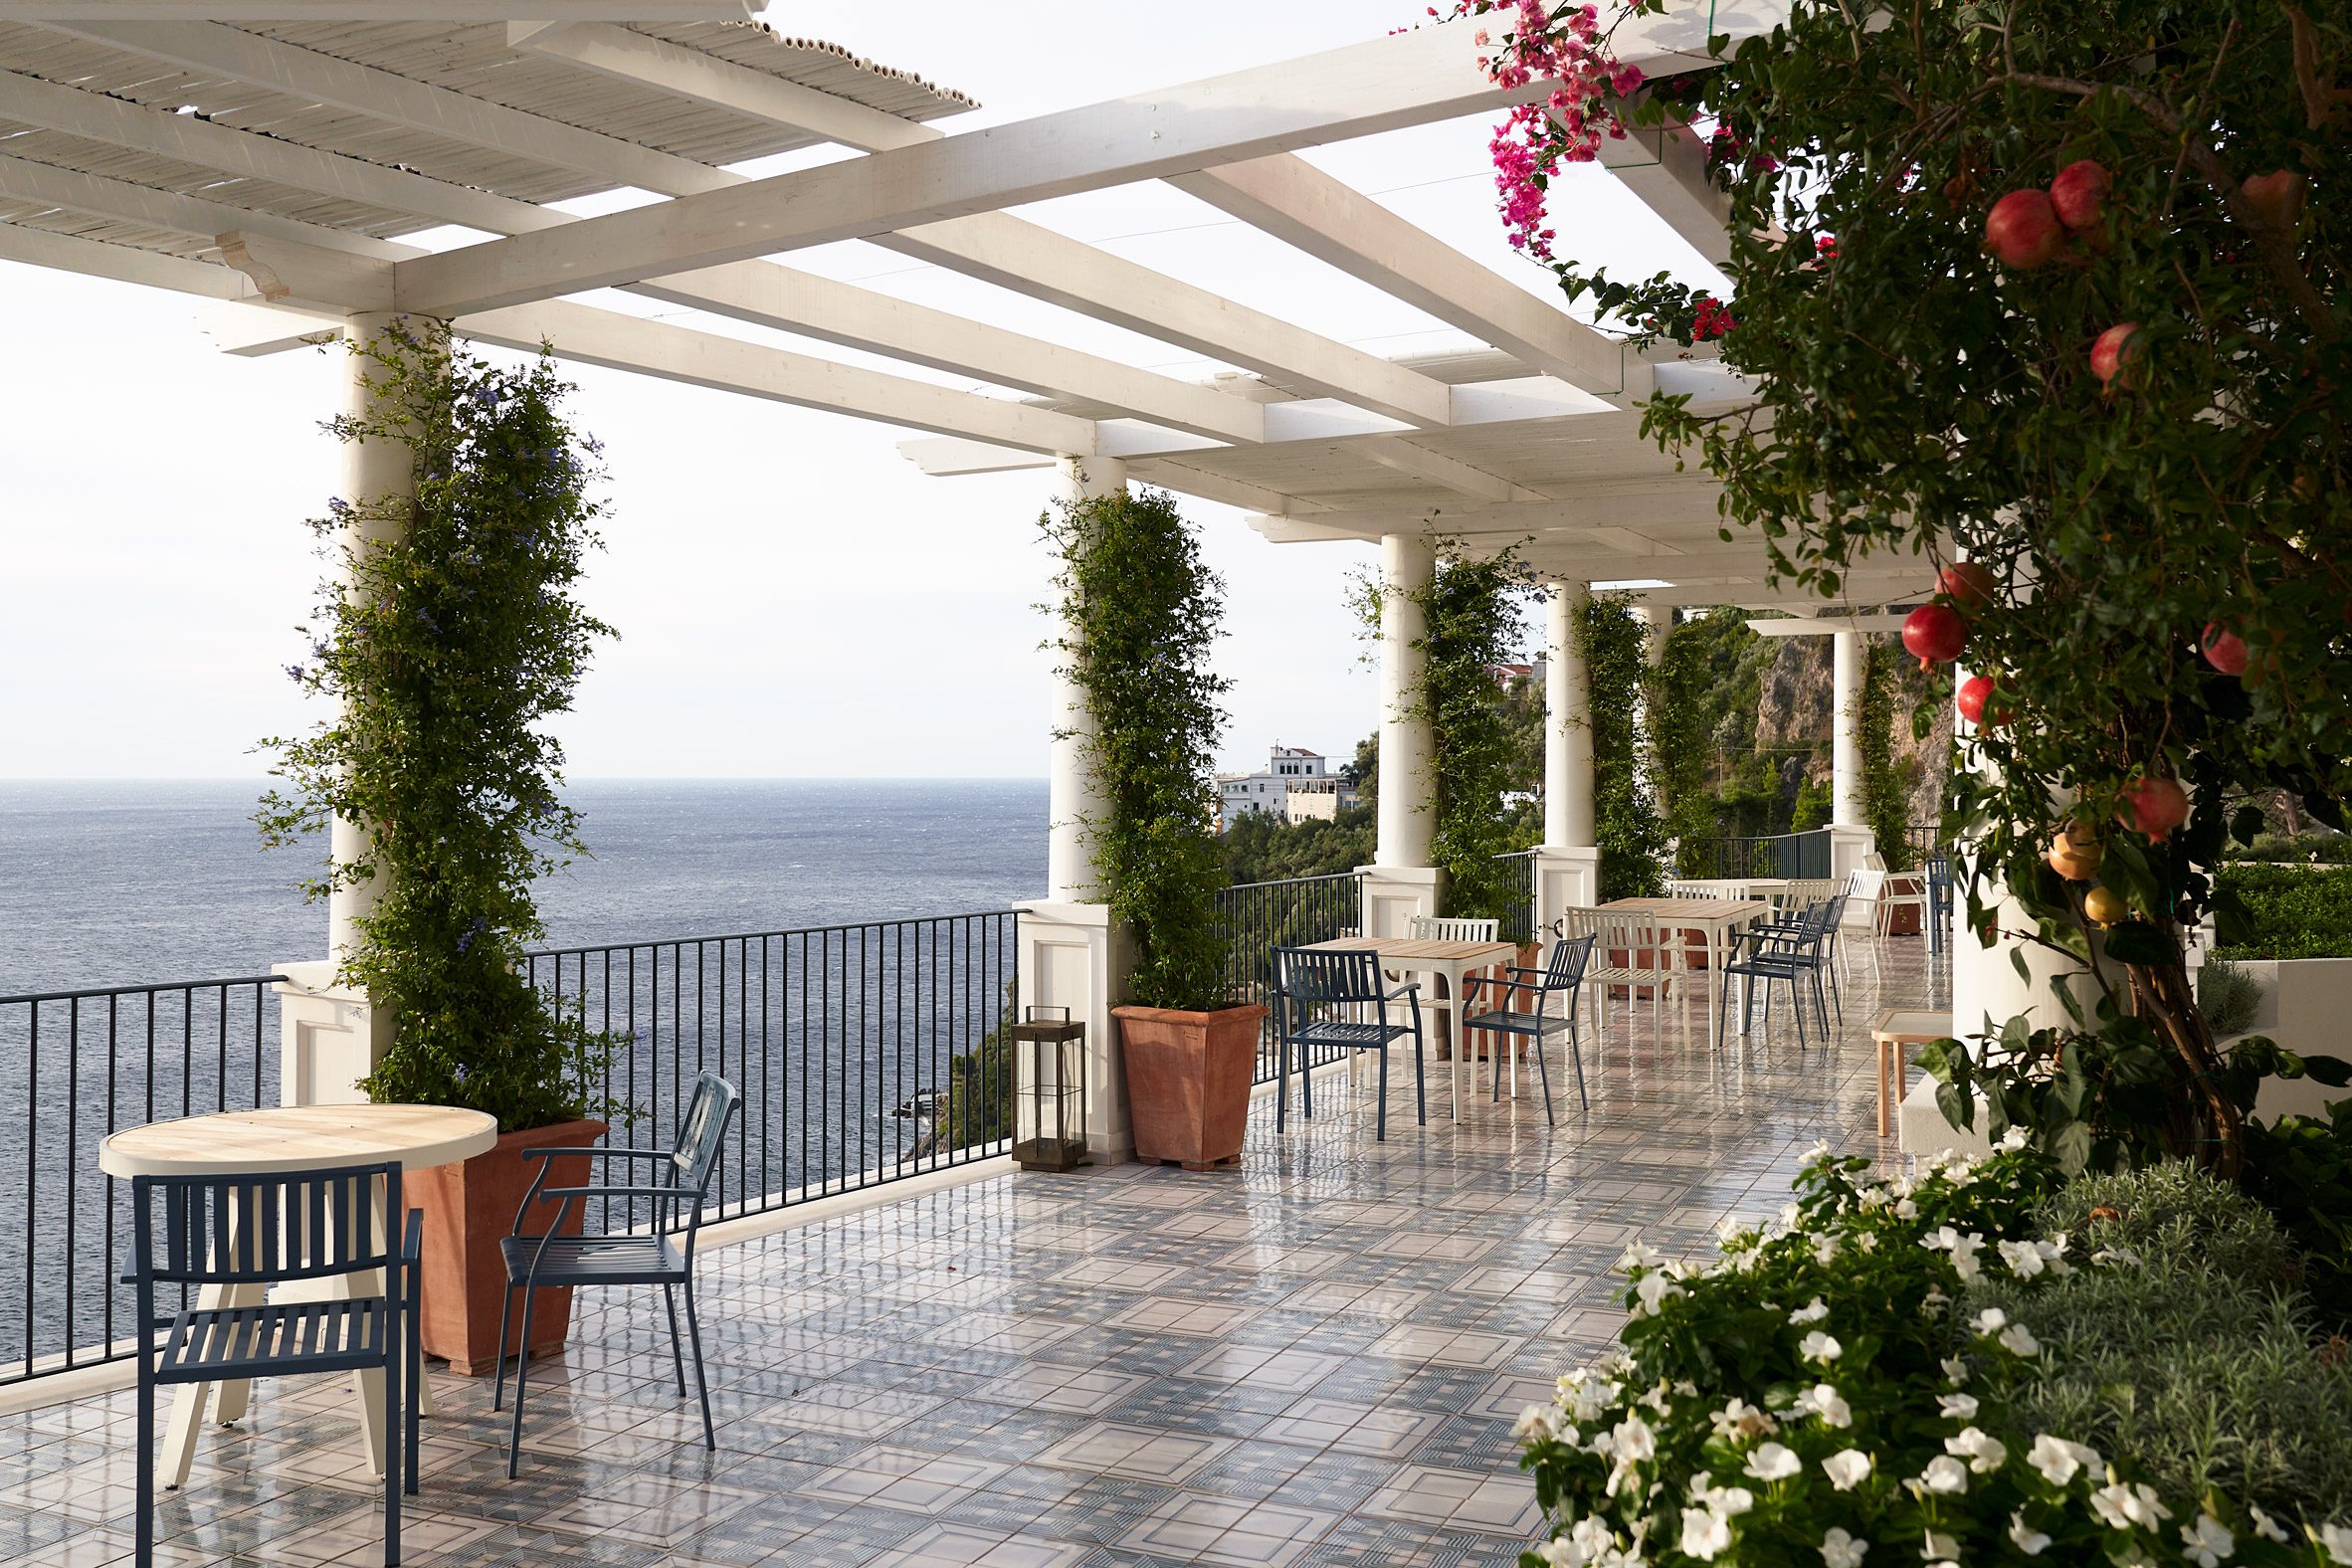 Large terrace with tiled floor covered by a white pergola